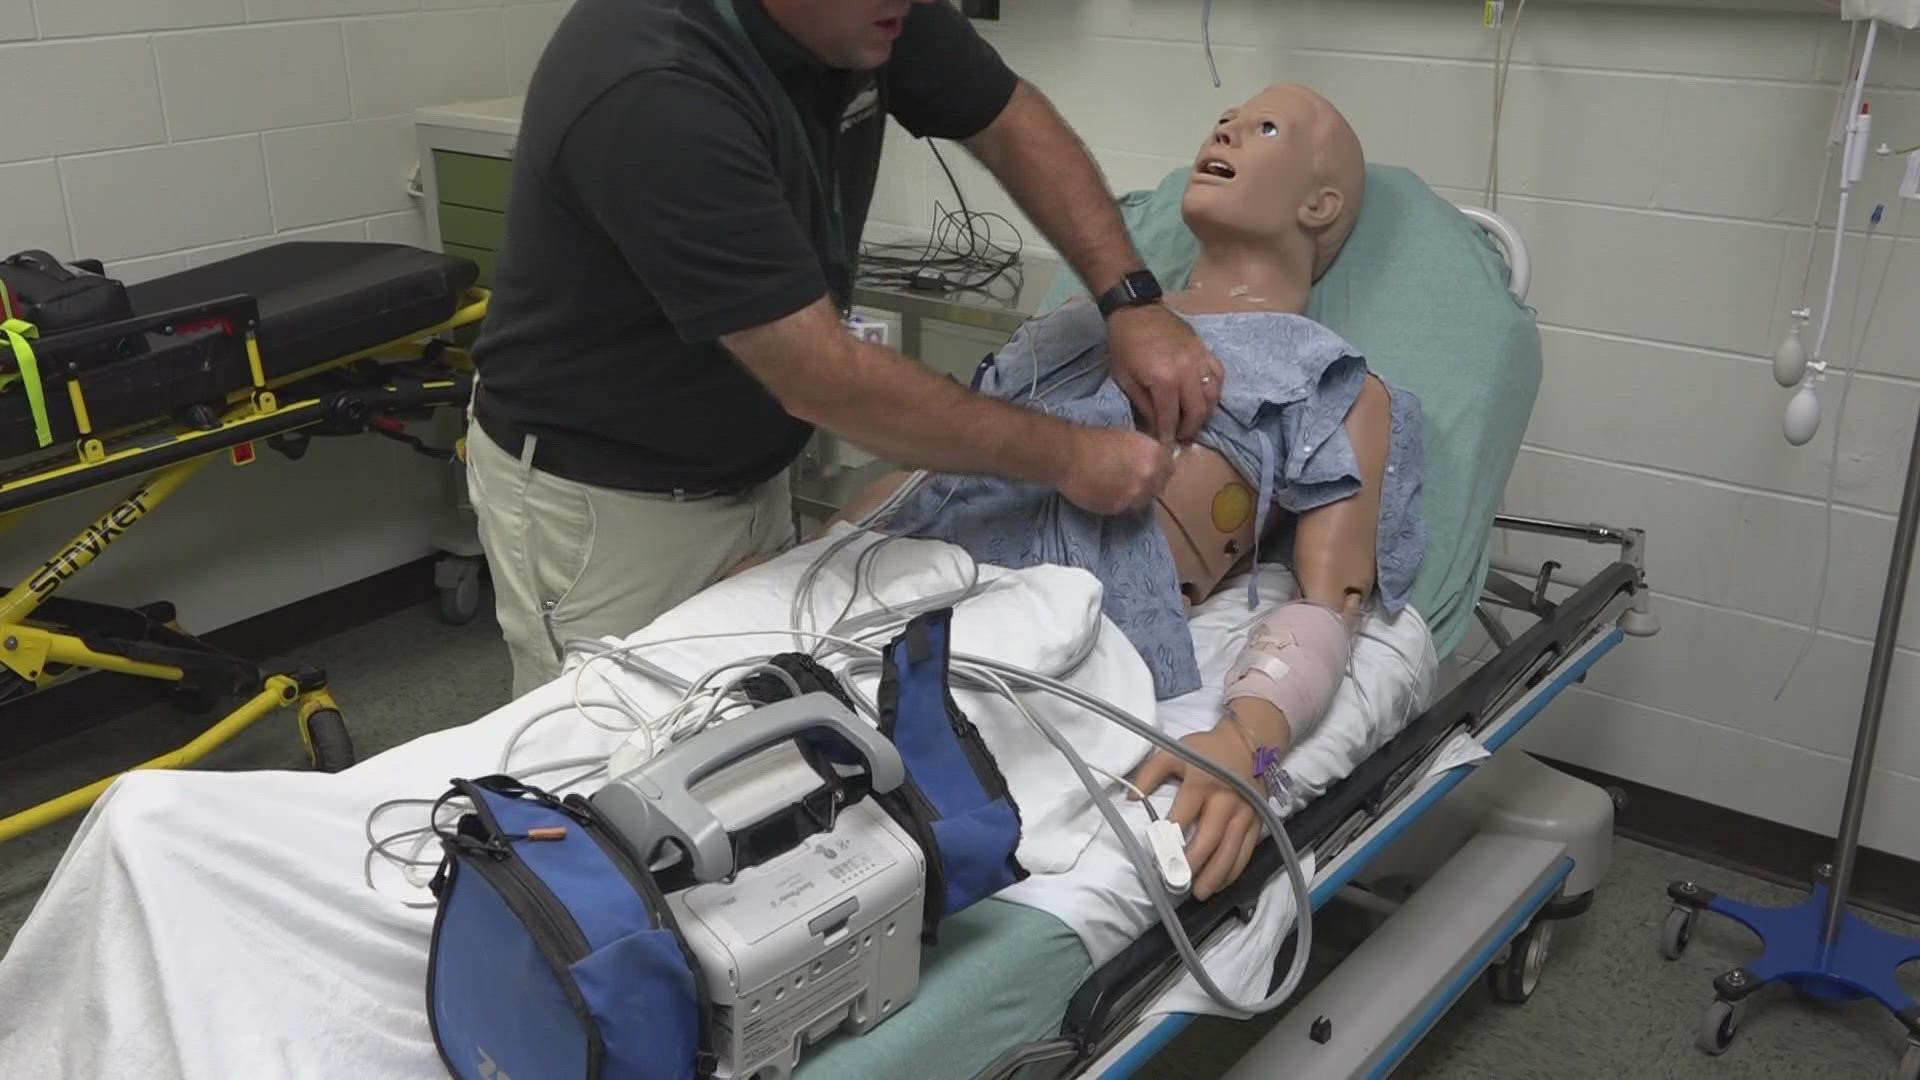 The lab comes with a human manikin that breaths, talks, and shows lifelike medical symptoms and conditions.